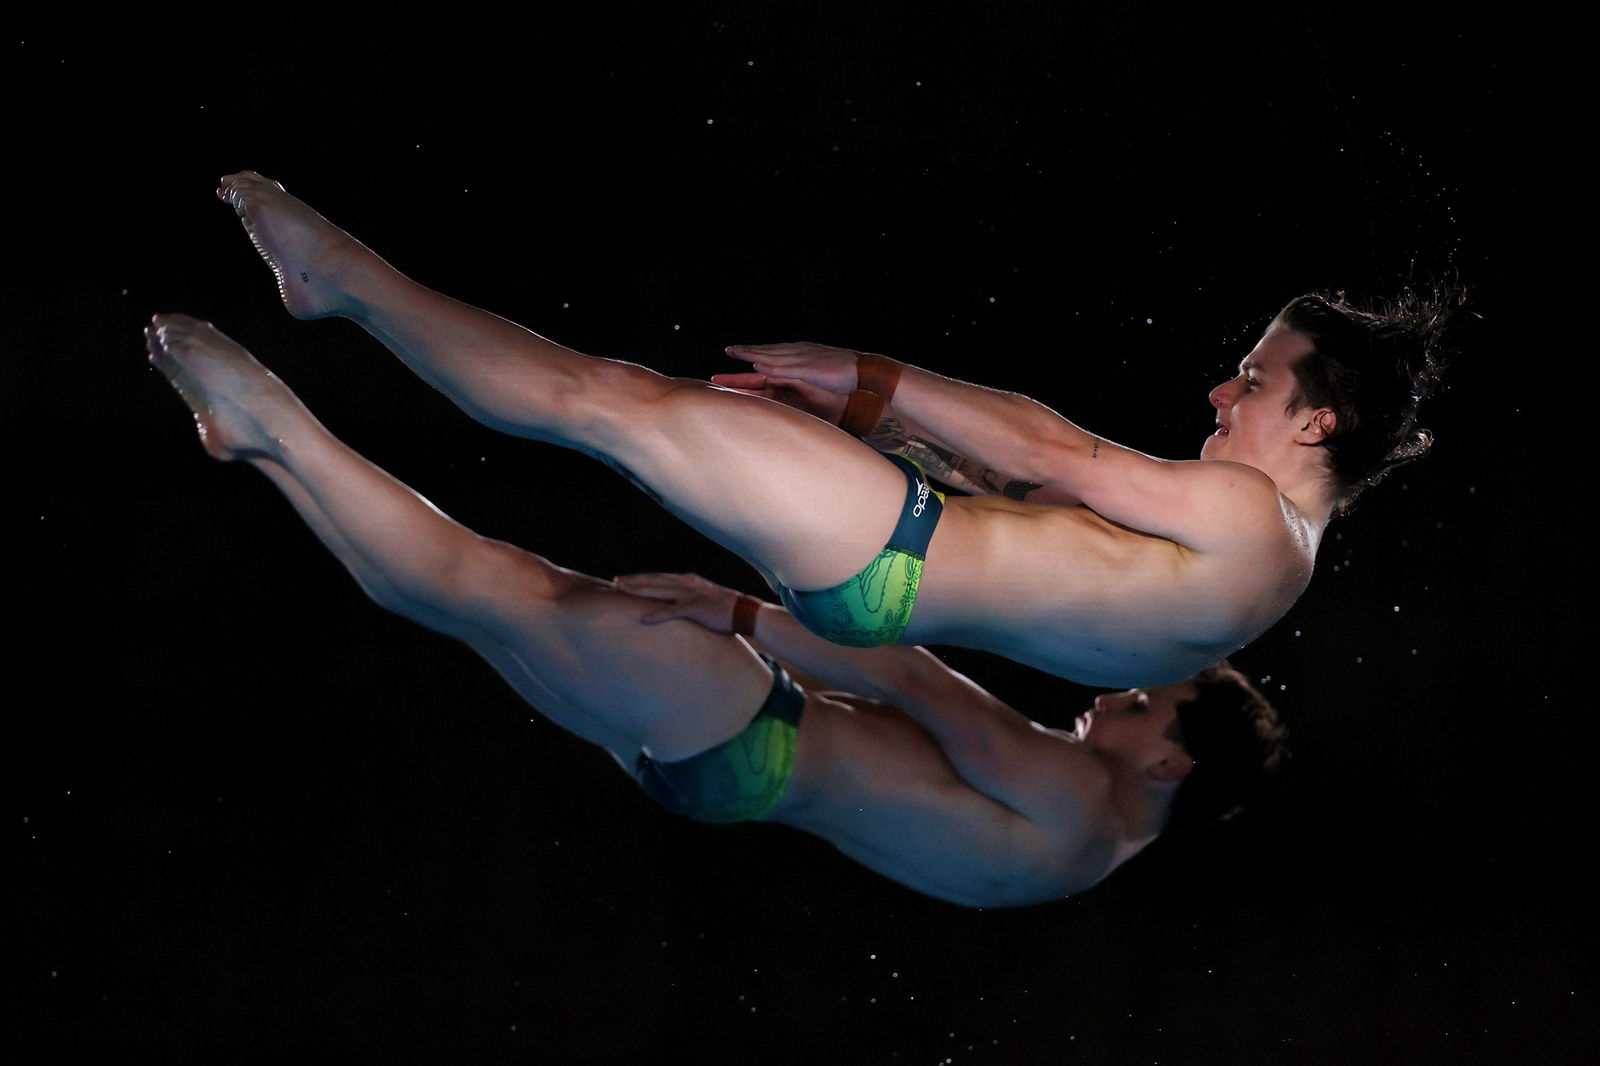 Two men warm up before a synchronised diving competition